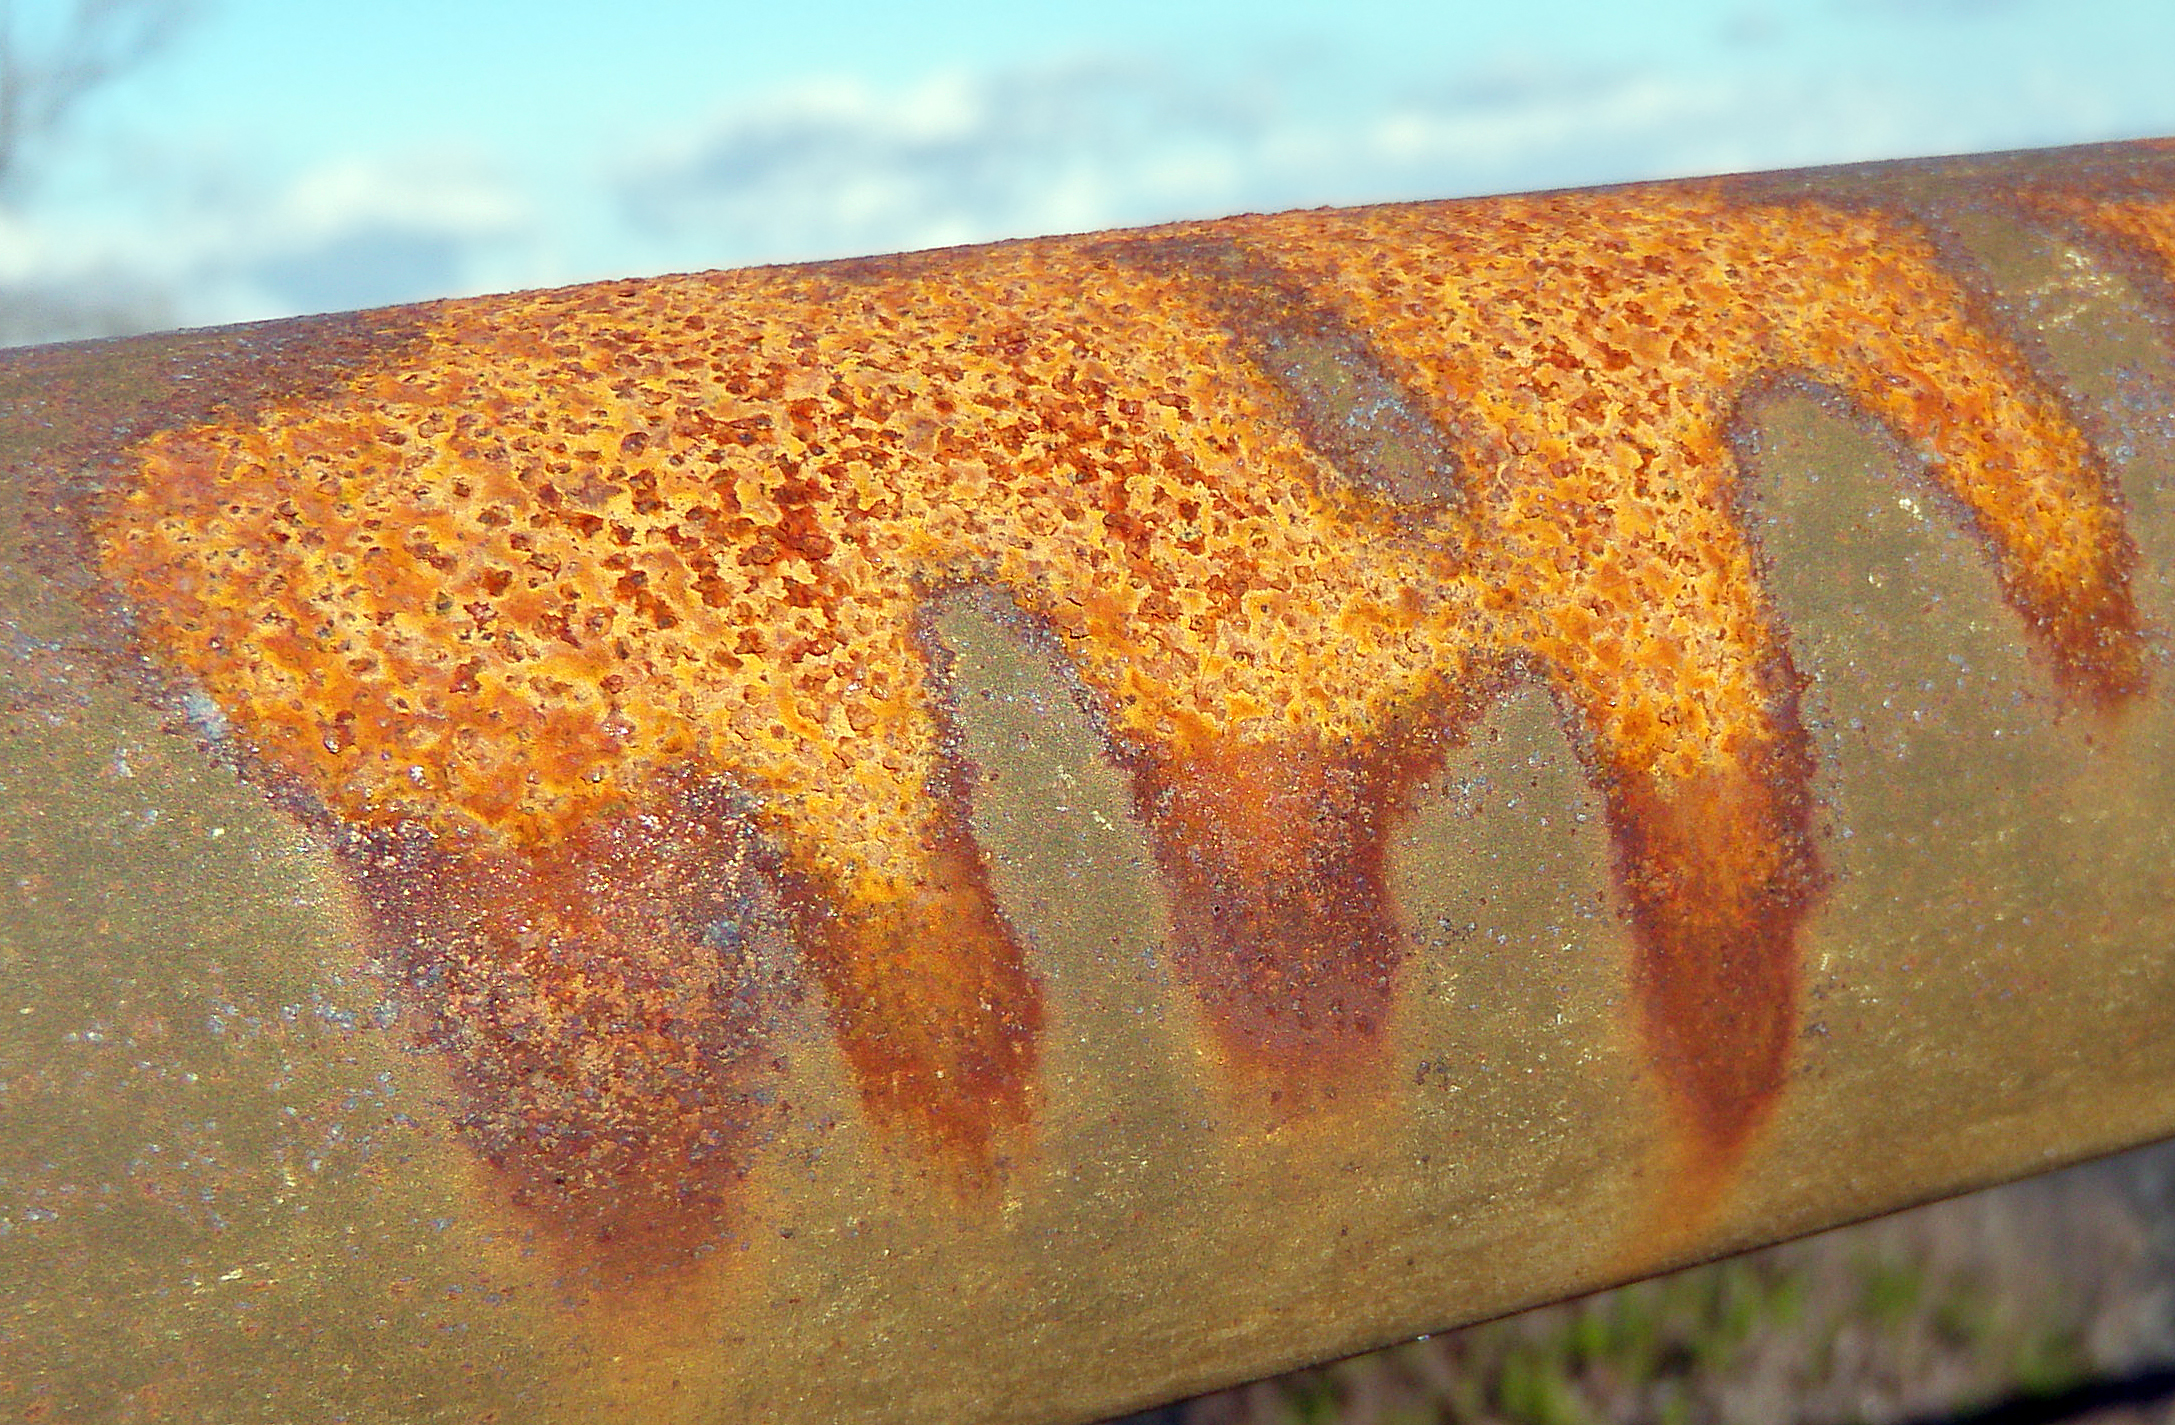 Pattern of rust on the rail